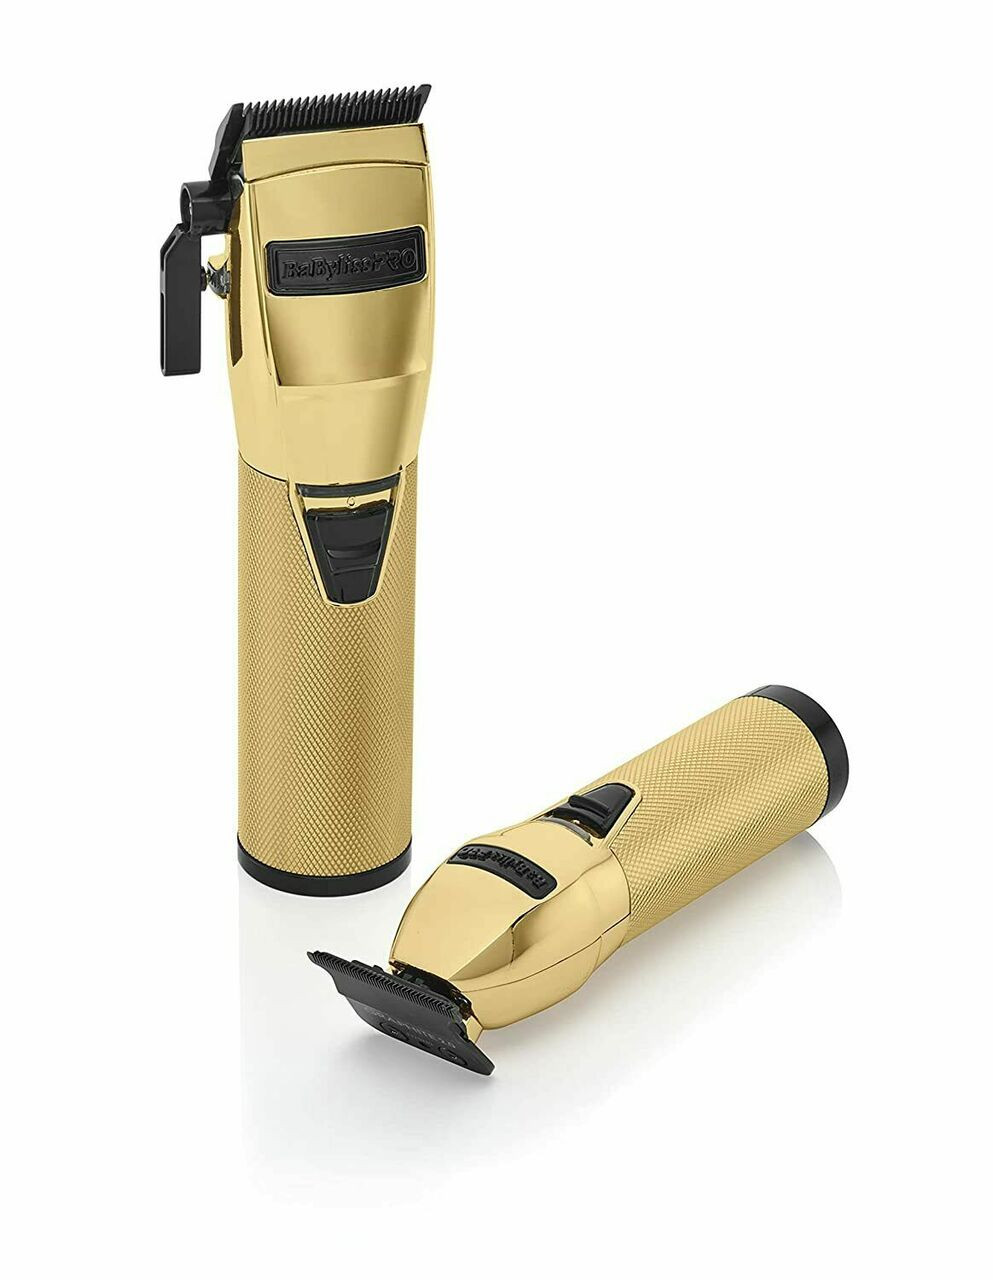 Babyliss Pro Metal FX Series Gold Clipper and Trimmer Set - My Salon  Express Barber and Salon Supply